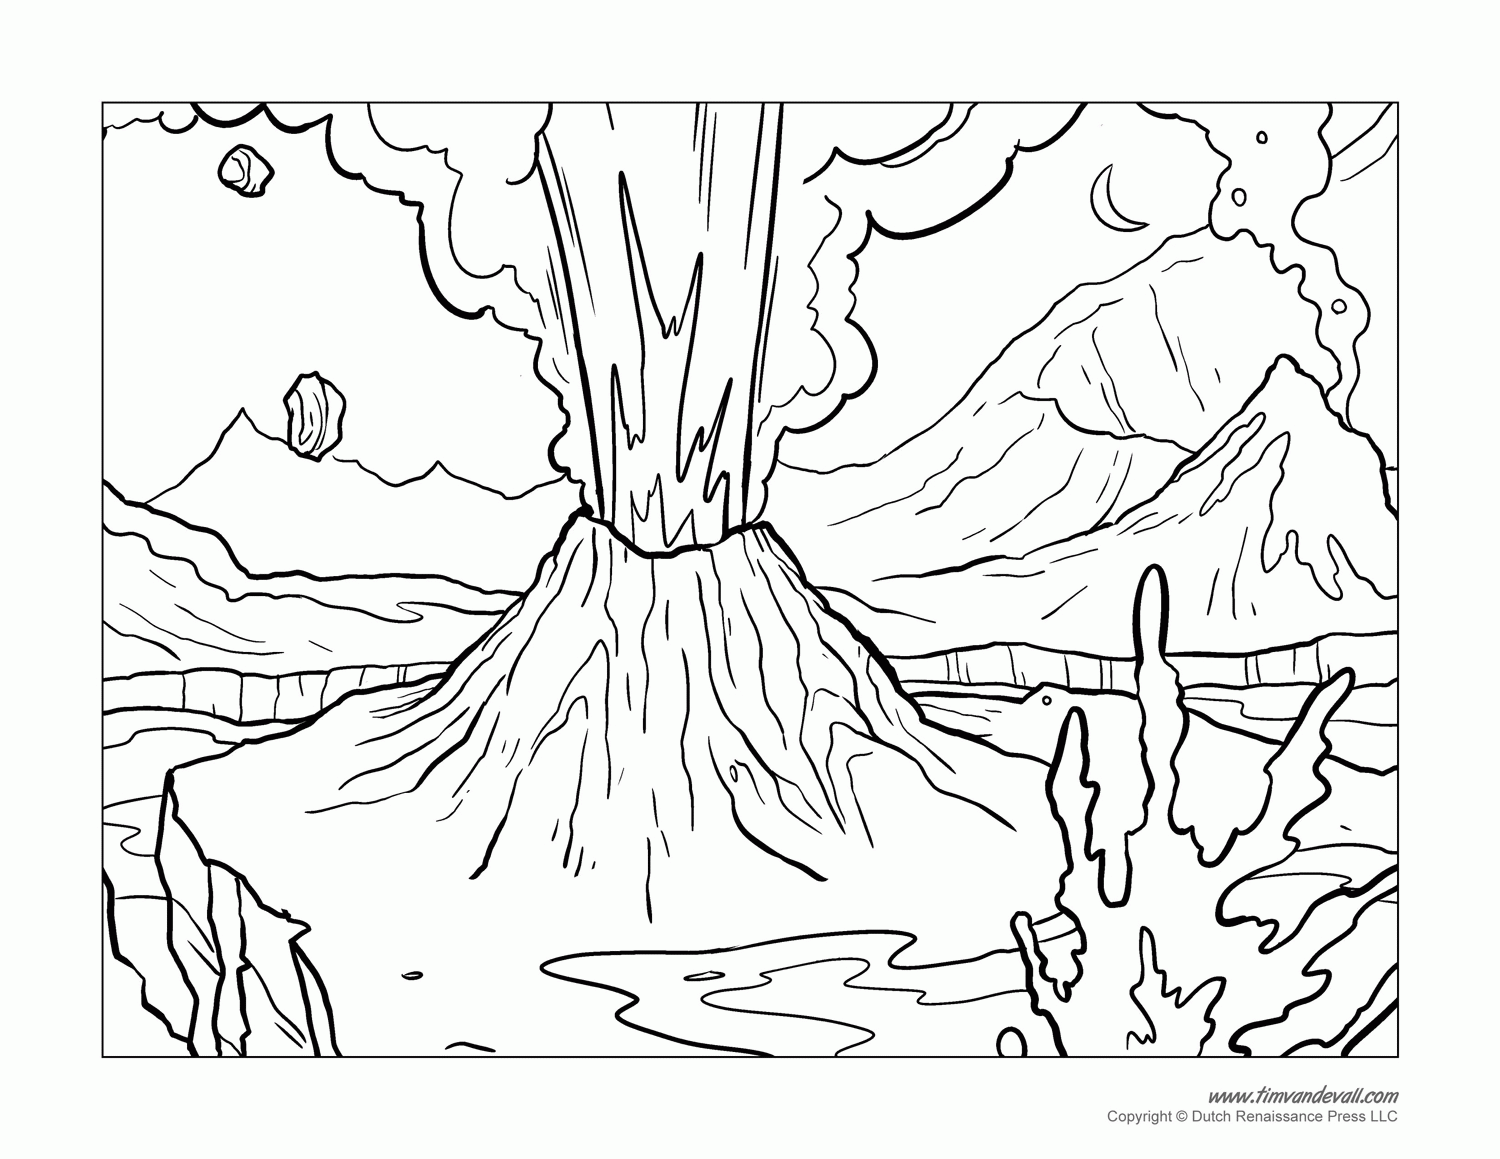 Volcano Coloring Page For Kids